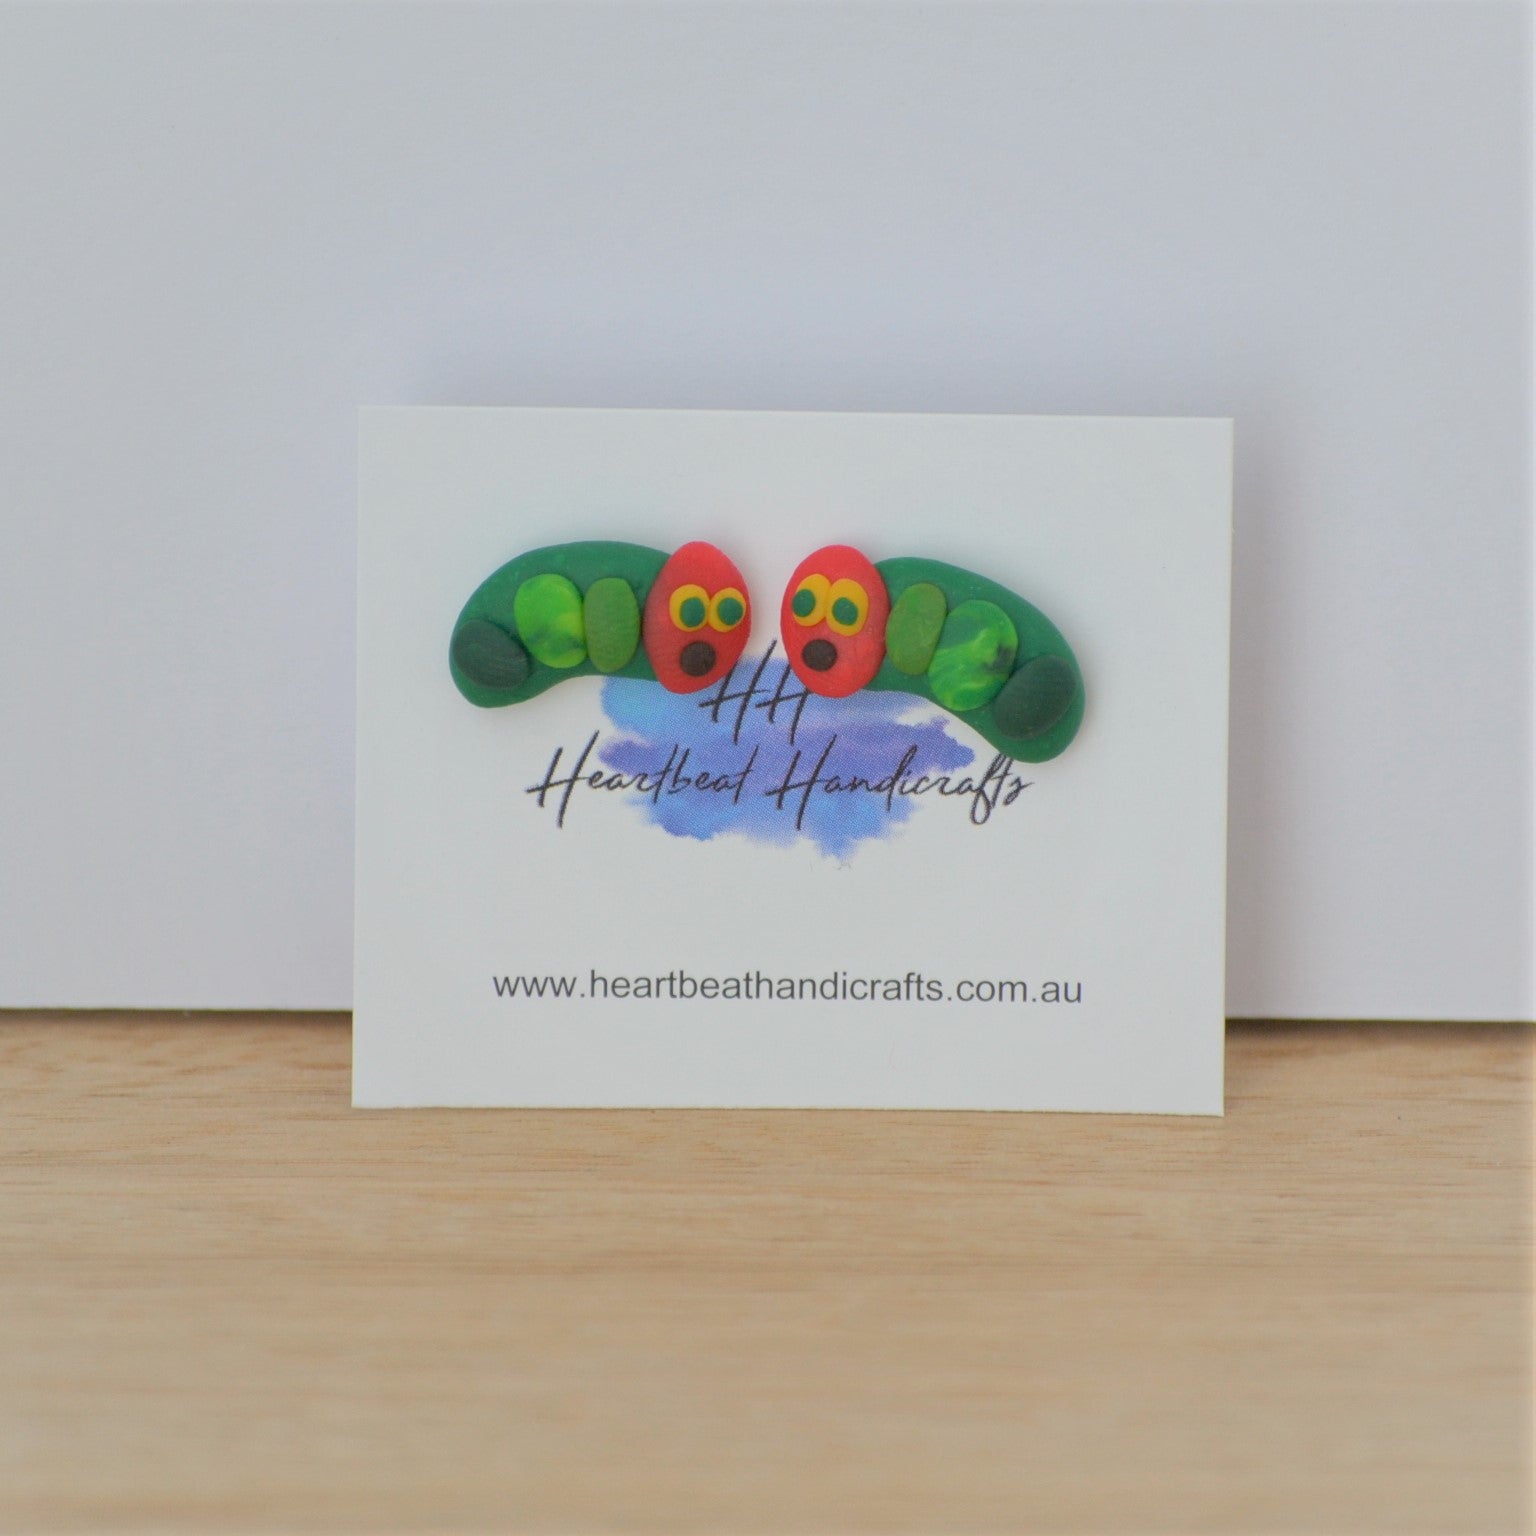 Caterpillar stud earrings shown on earrings card on timber and white background